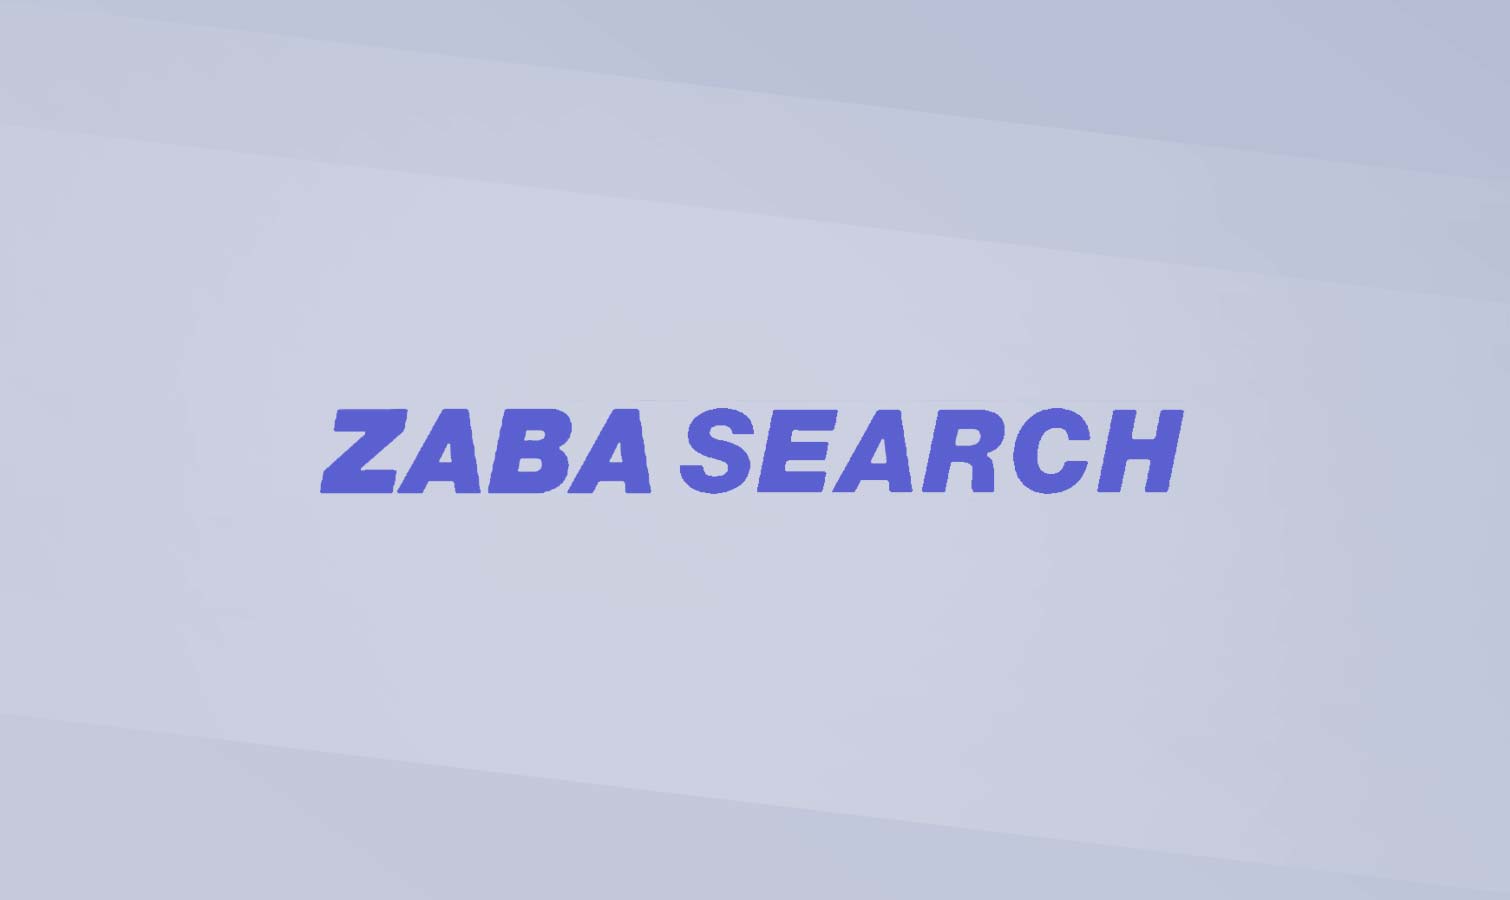 How To Find People With Zabasearch